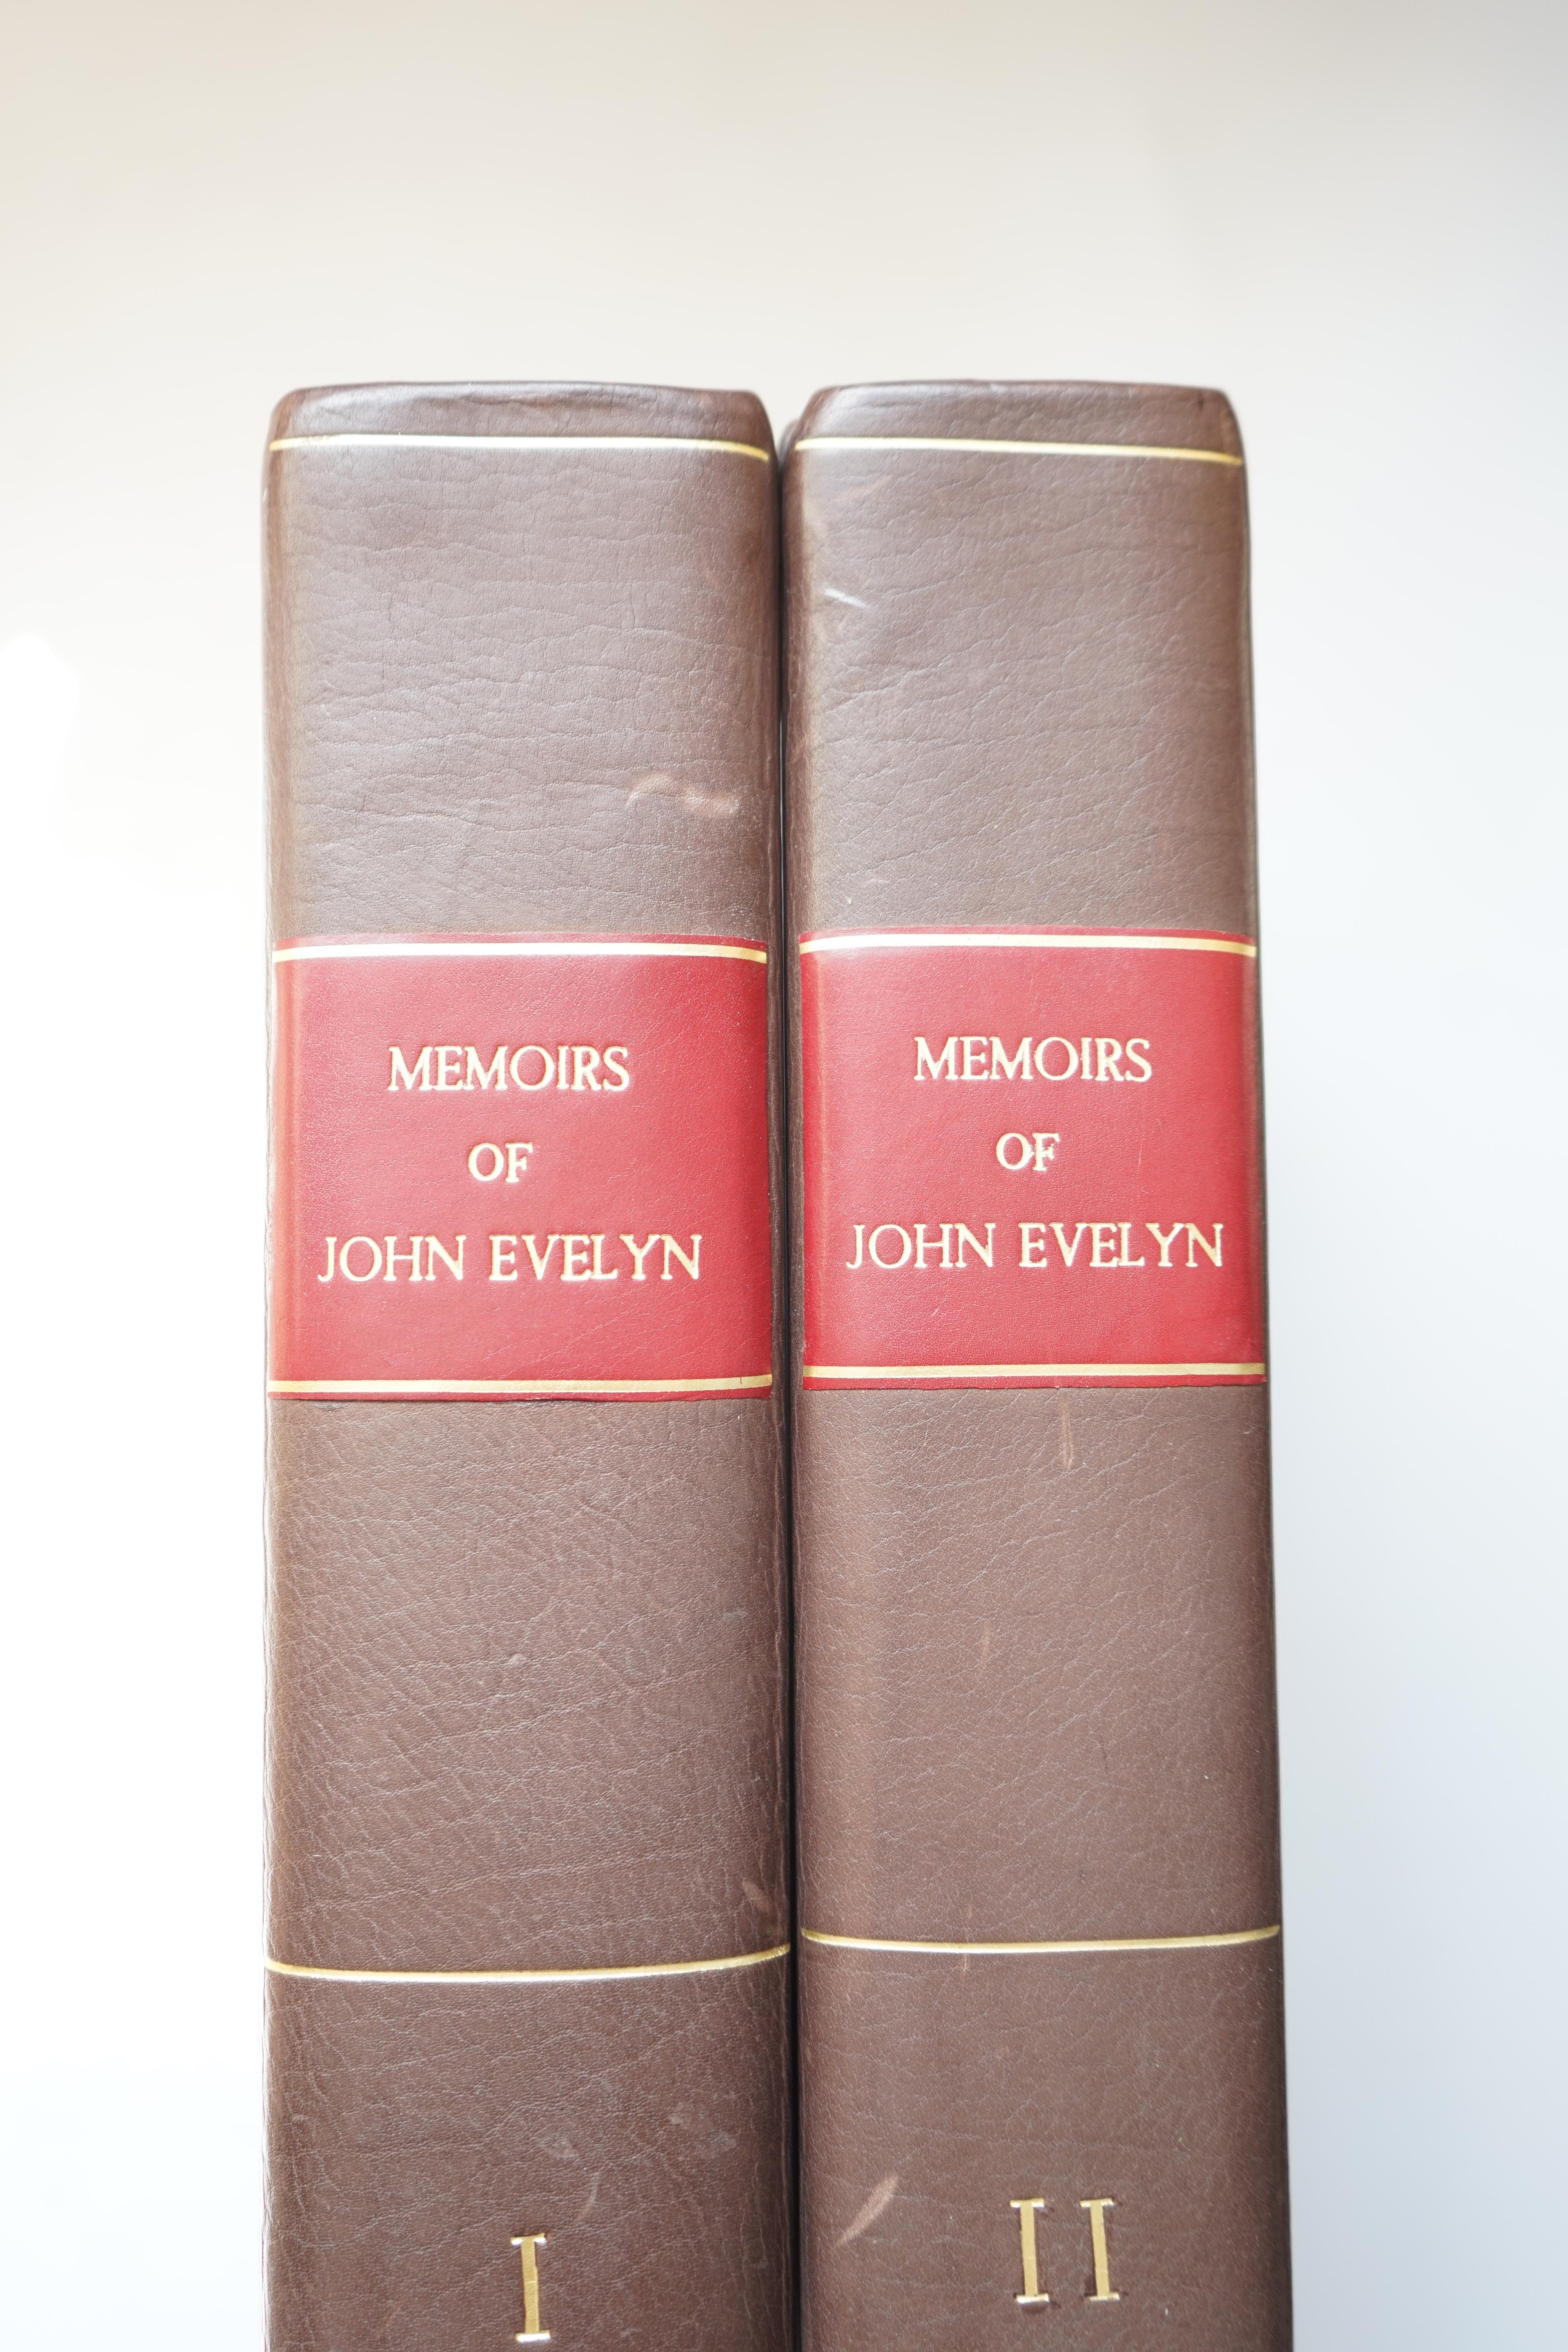 Evelyn , John - Memoirs Illustrative of the Life and Writings of John Evelyn, Esq. F.R.S., edited by William Bray, 2 Vols, 2nd edition, large paper copy, rebound quarter calf with renewed endpapers, with 12 engraved plat